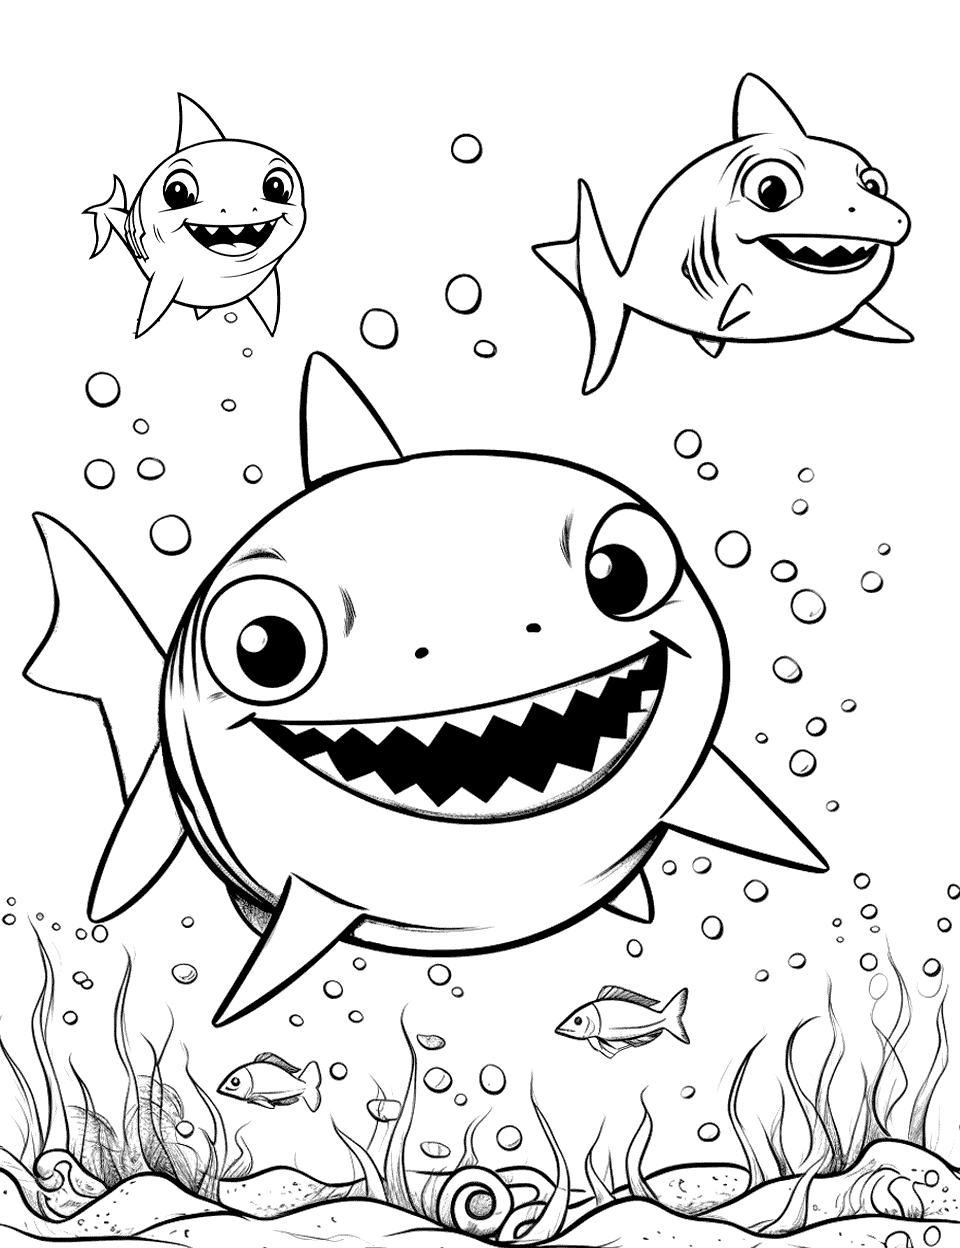 Baby Shark's Race Shark Coloring Page - Baby Shark racing with friends underwater.